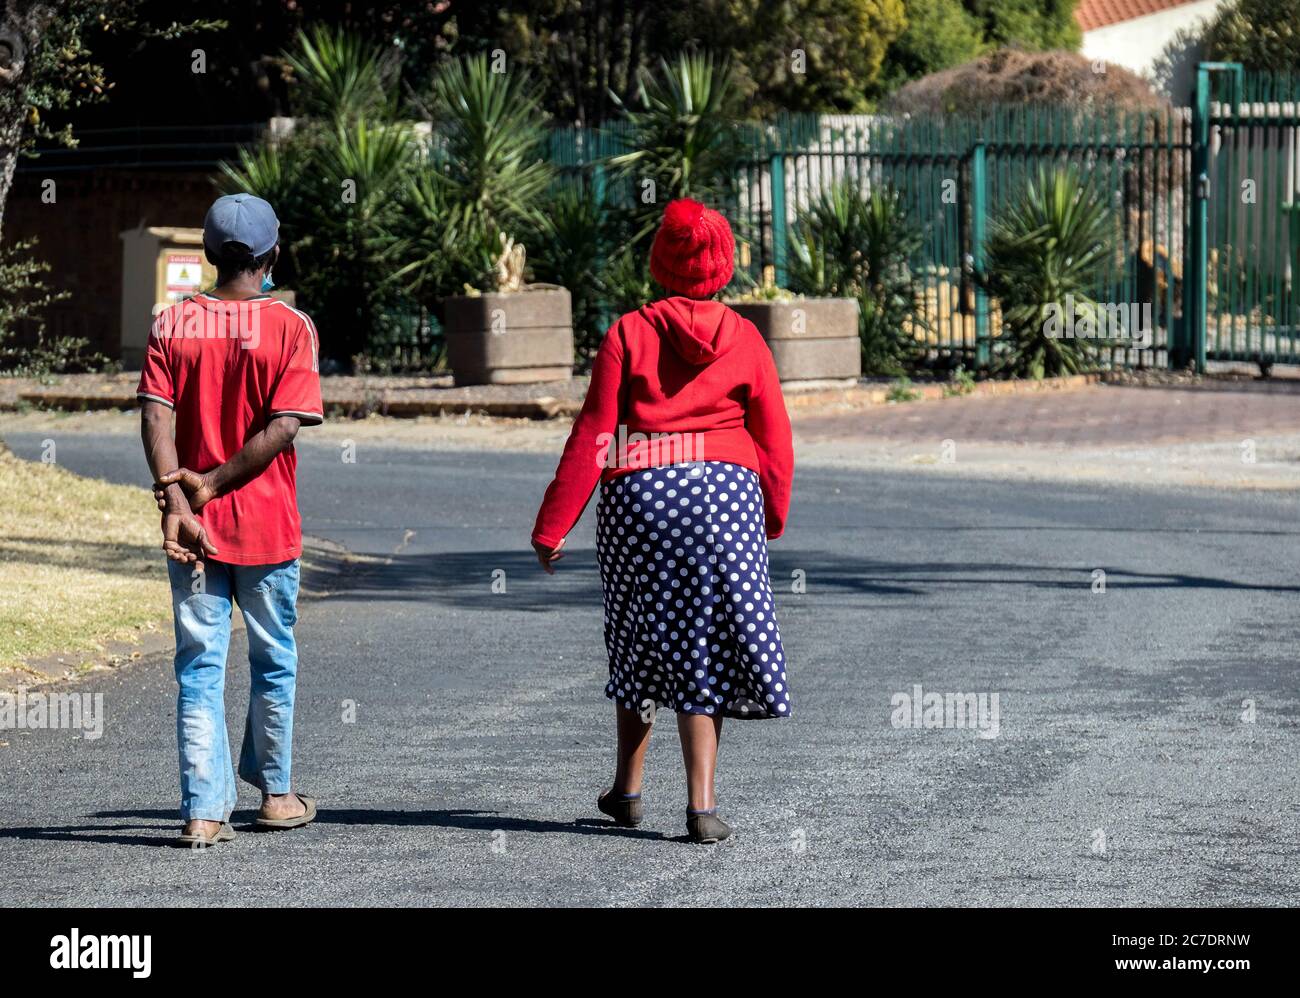 Alberton, South Africa - unidentified elderly black couple walking in a public street during lockdown for covid-19 image in horizontal format Stock Photo